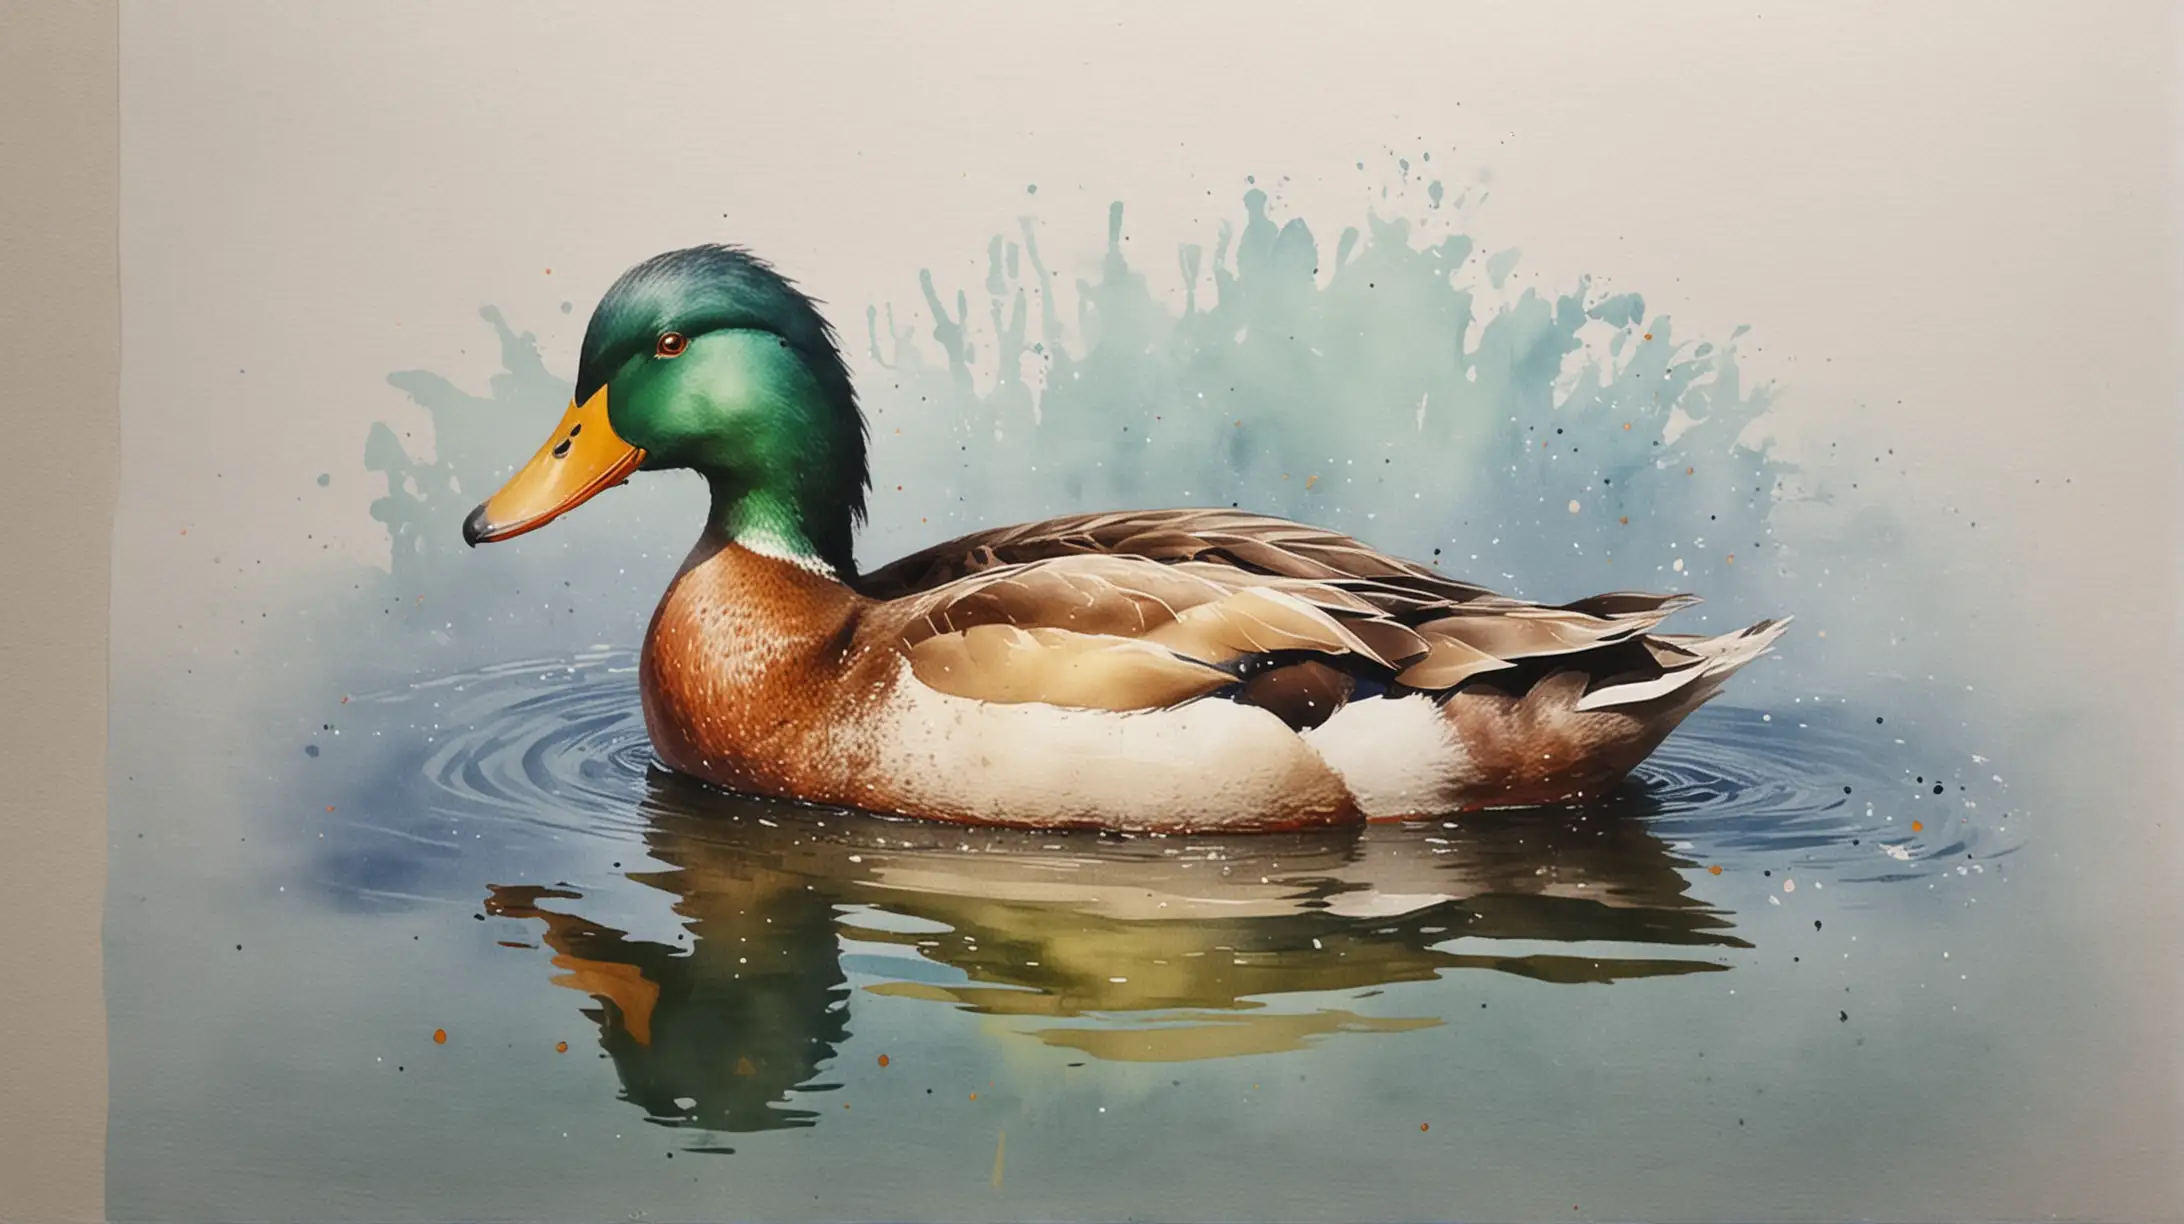 Vibrant Watercolor Painting of a Graceful Duck